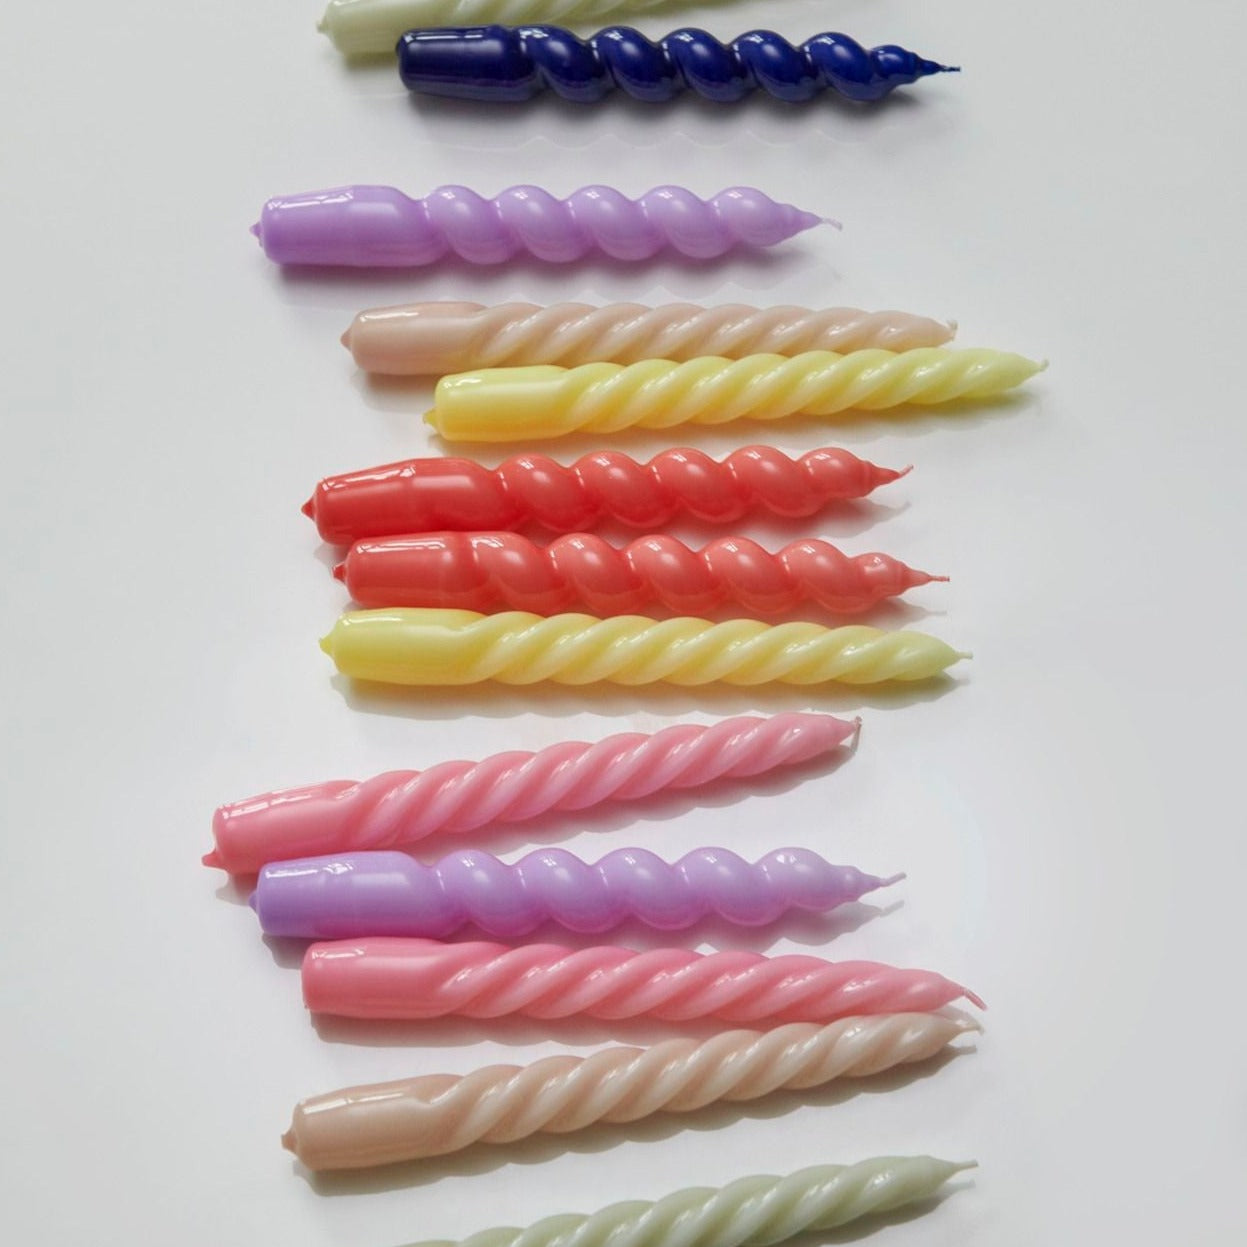 CANDLE TWIST (VARIOUS COLORS) Club Palma 